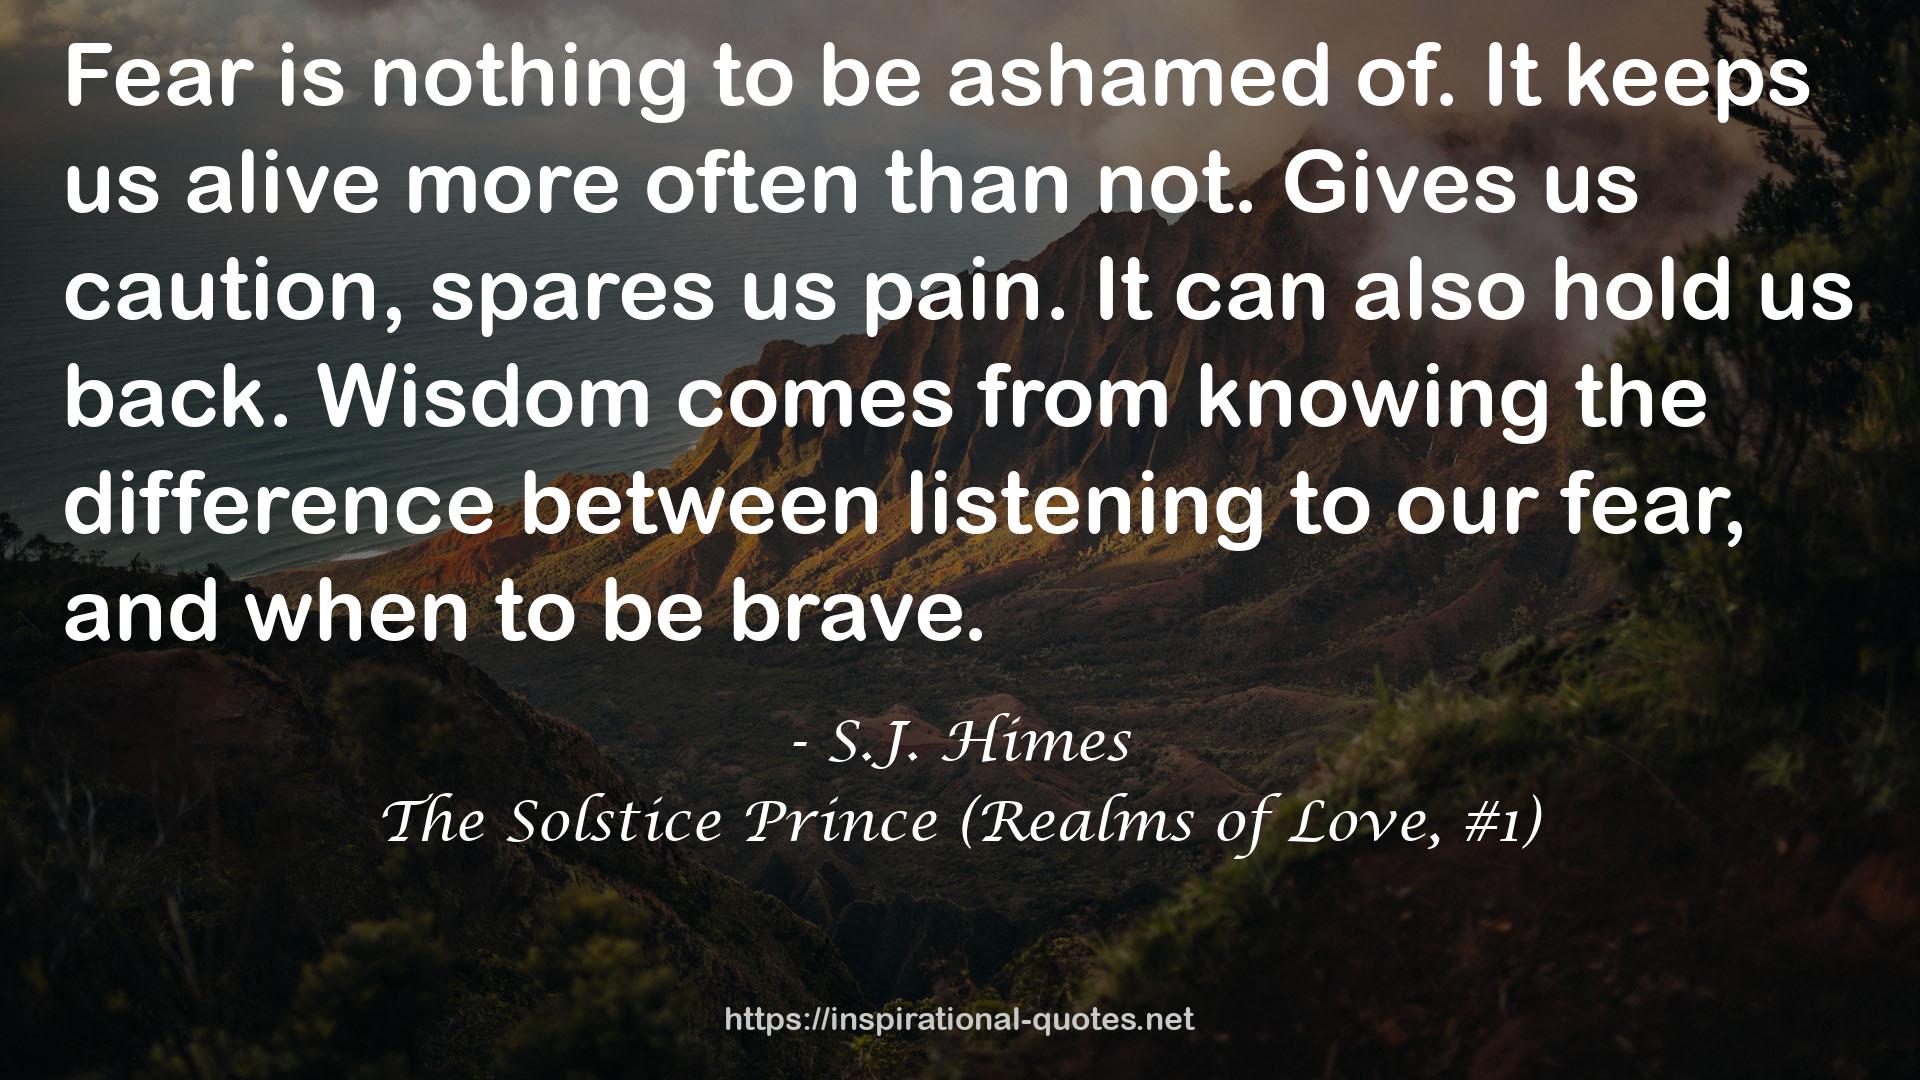 The Solstice Prince (Realms of Love, #1) QUOTES